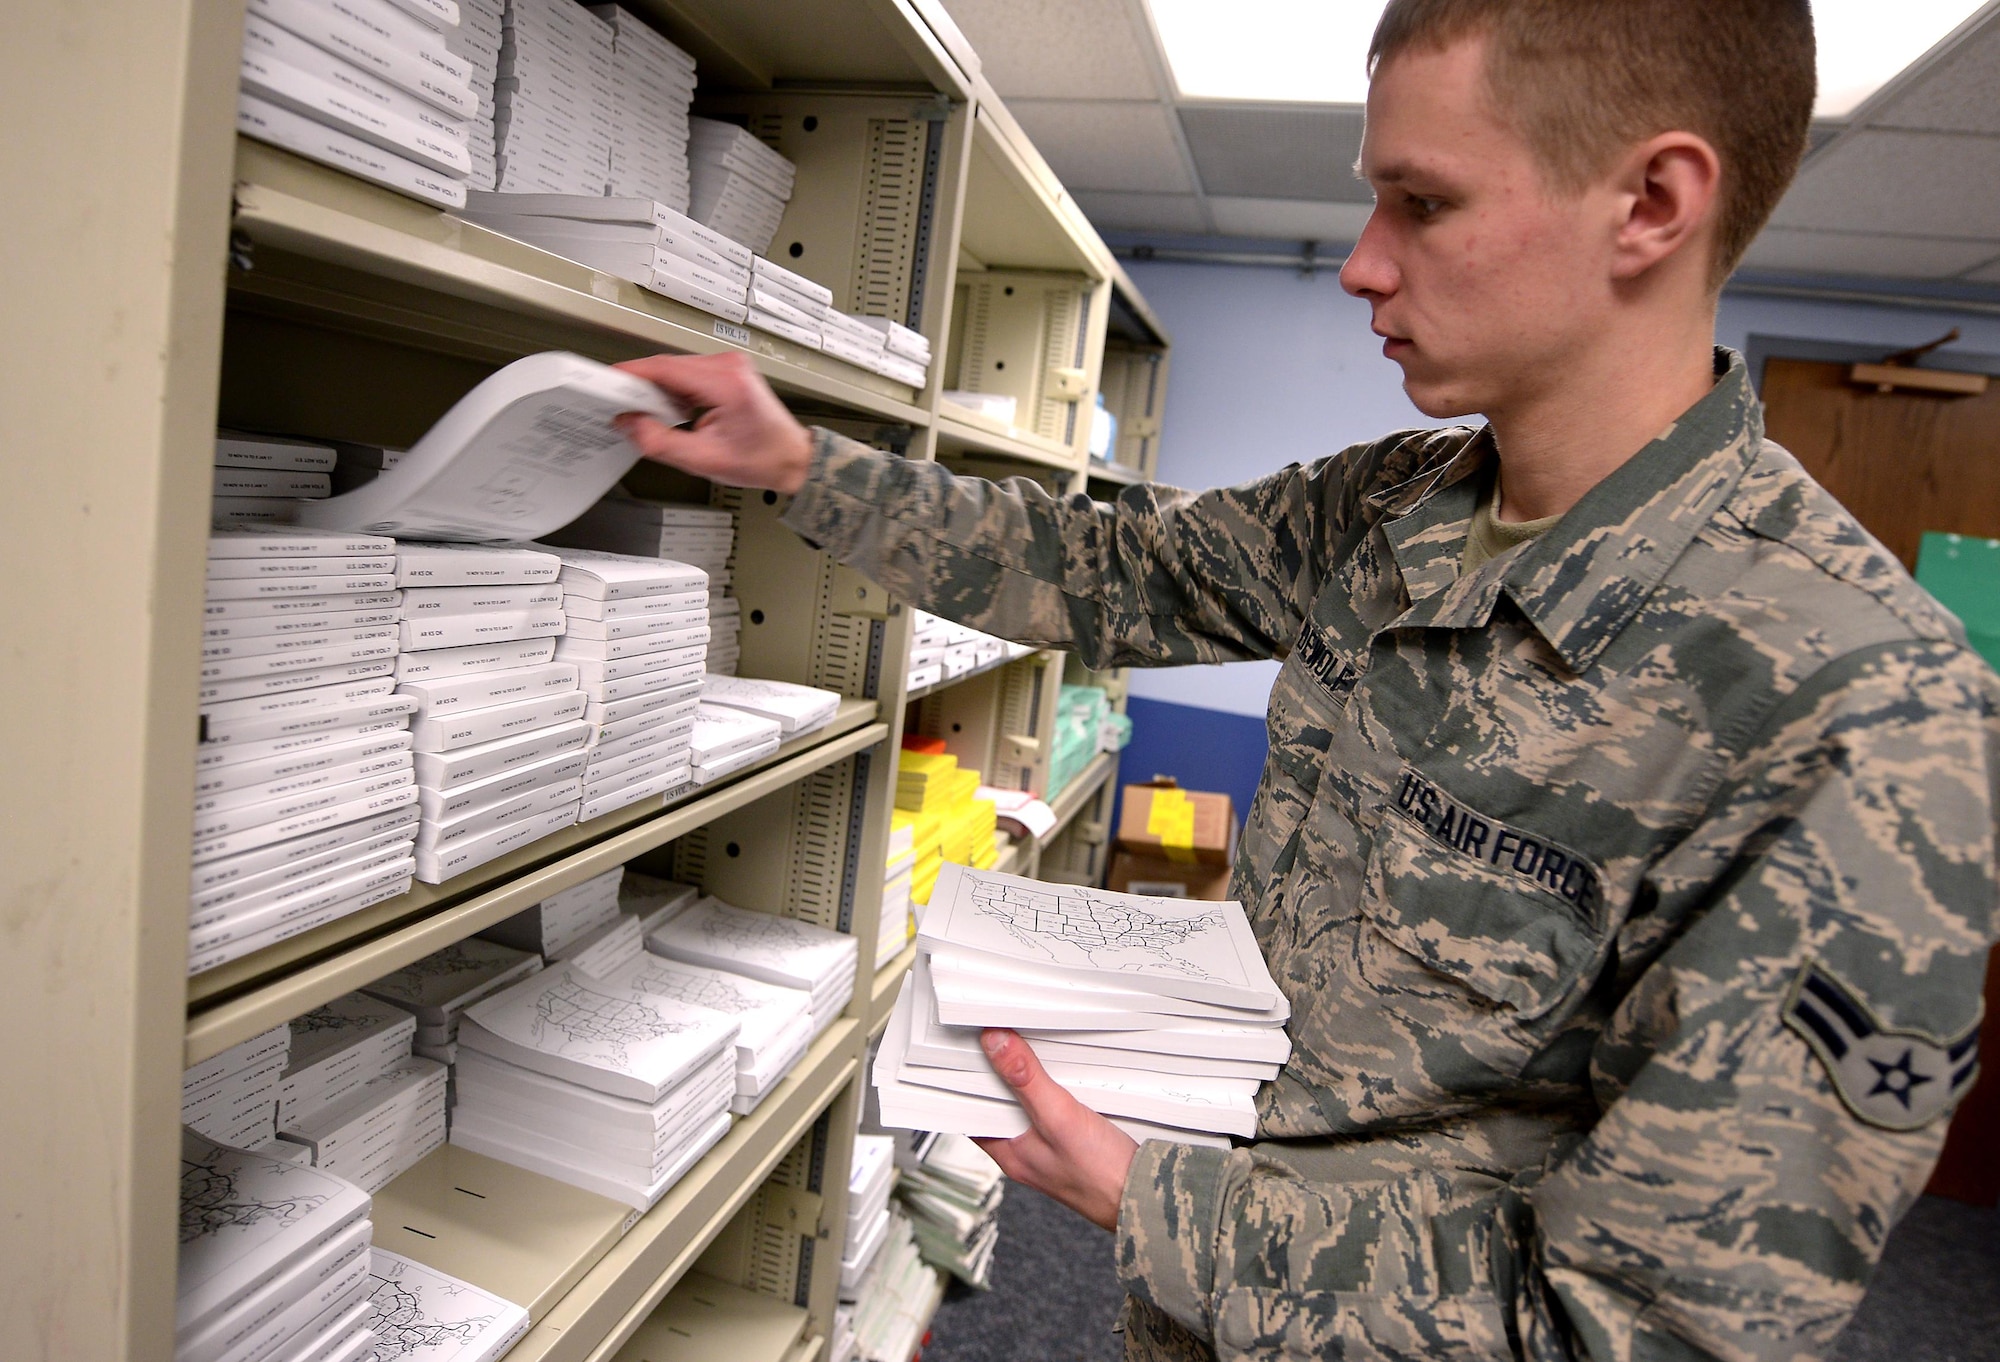 Airman 1st Class Maxim Dewolf, a combat crew communications apprentice assigned to the 55th Operations Support Squadron, builds a flight information publications bag for an Offutt mission Nov. 30, 2016 at Offutt Air Force Base, Neb. These paper publications will soon be replaced with digital versions loaded on Apple iPads as Offutt begins utilizing electronic flight bags. (U.S. Air Force photo by Delanie Stafford)